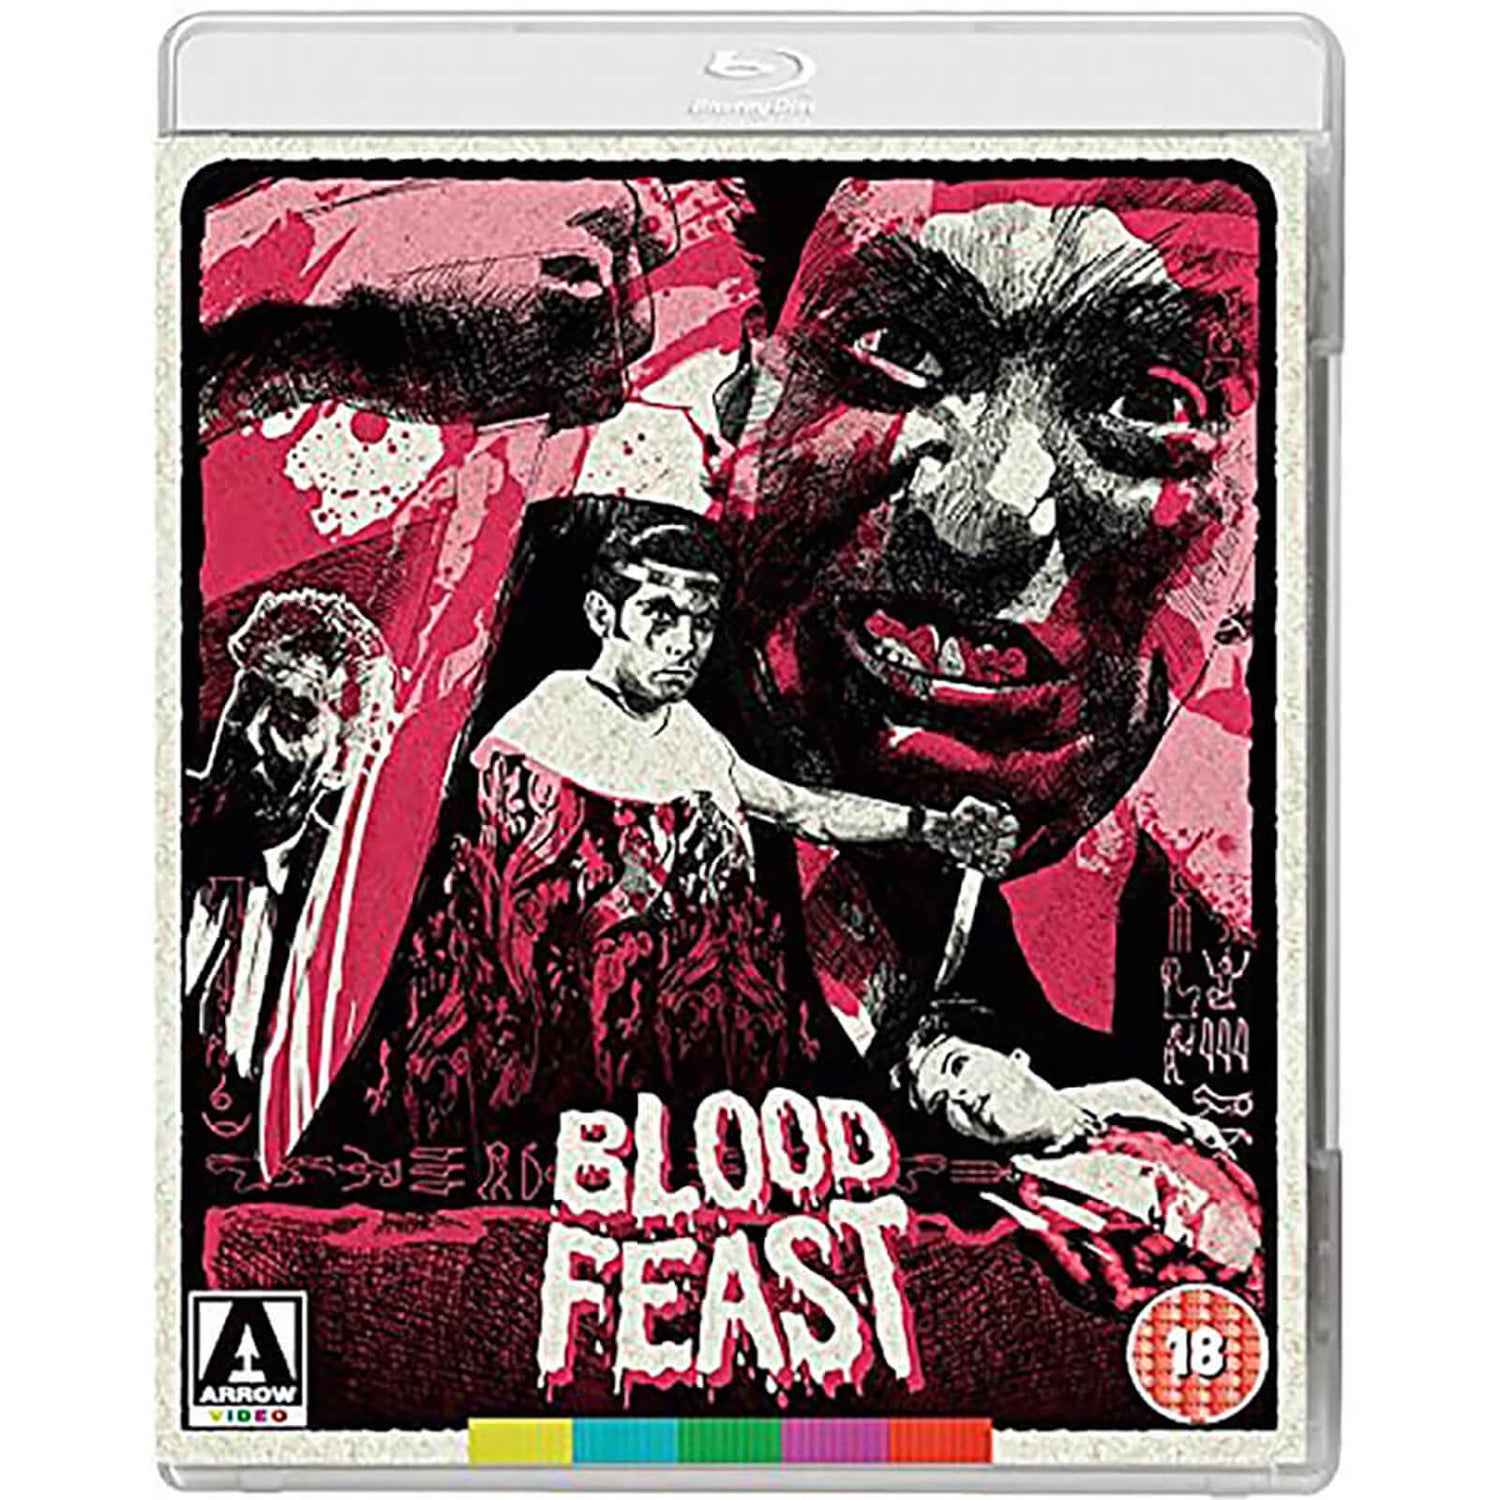 Blood Feast - Dual Format (Includes DVD)